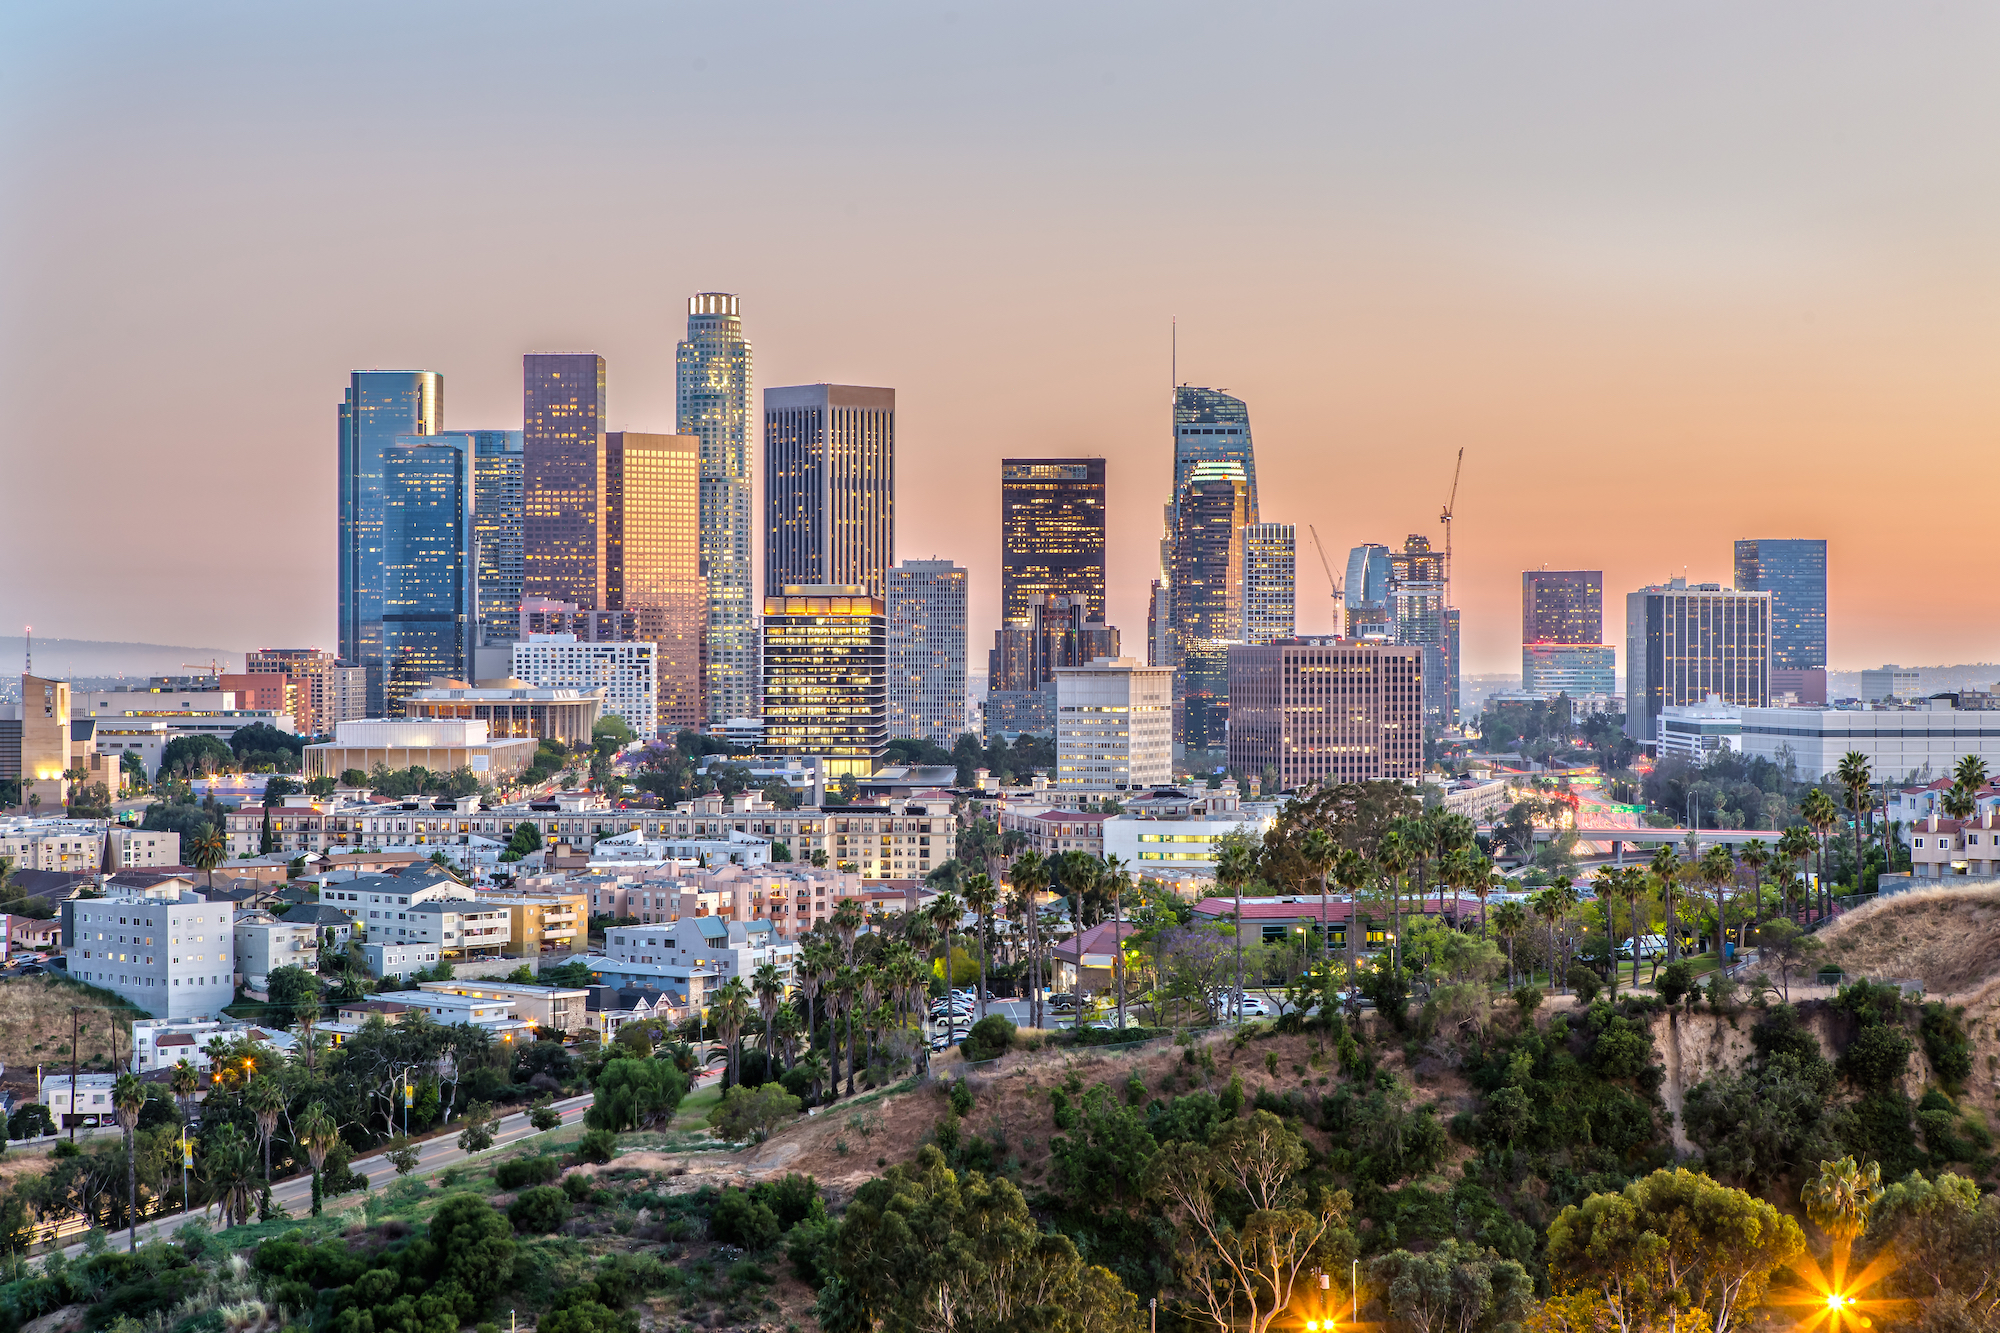 The downtown Los Angeles skyline during sunset.